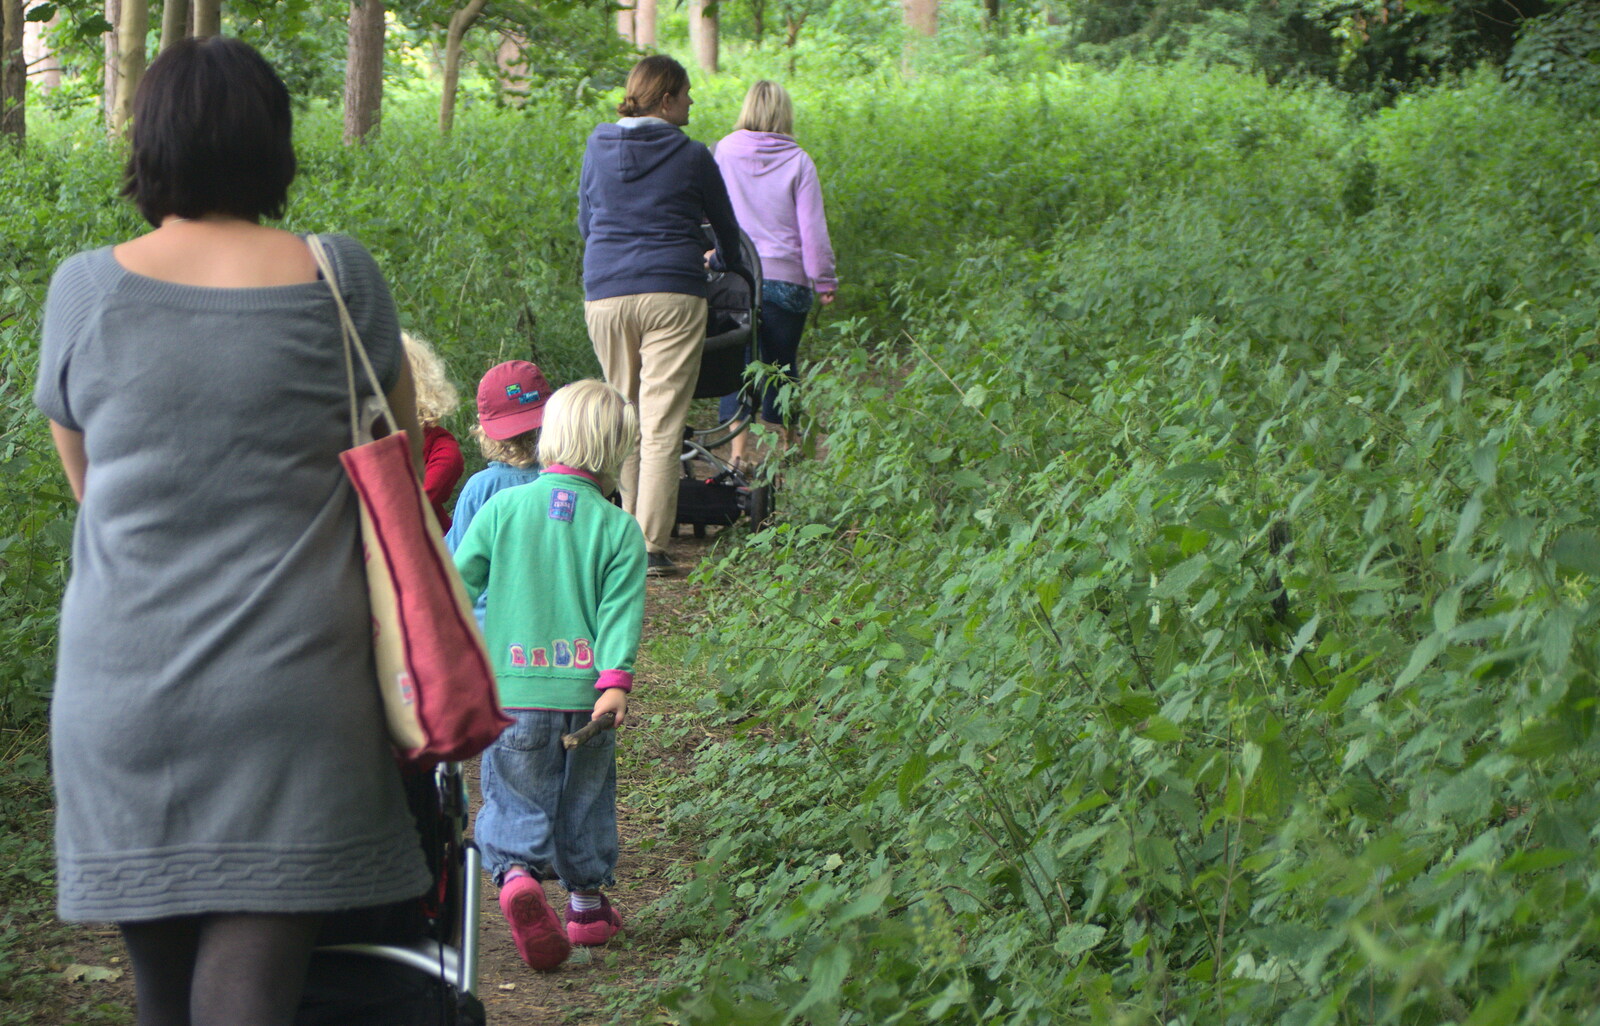 Walking through the nettles from Camping at Dower House, West Harling, Norfolk - 1st September 2012